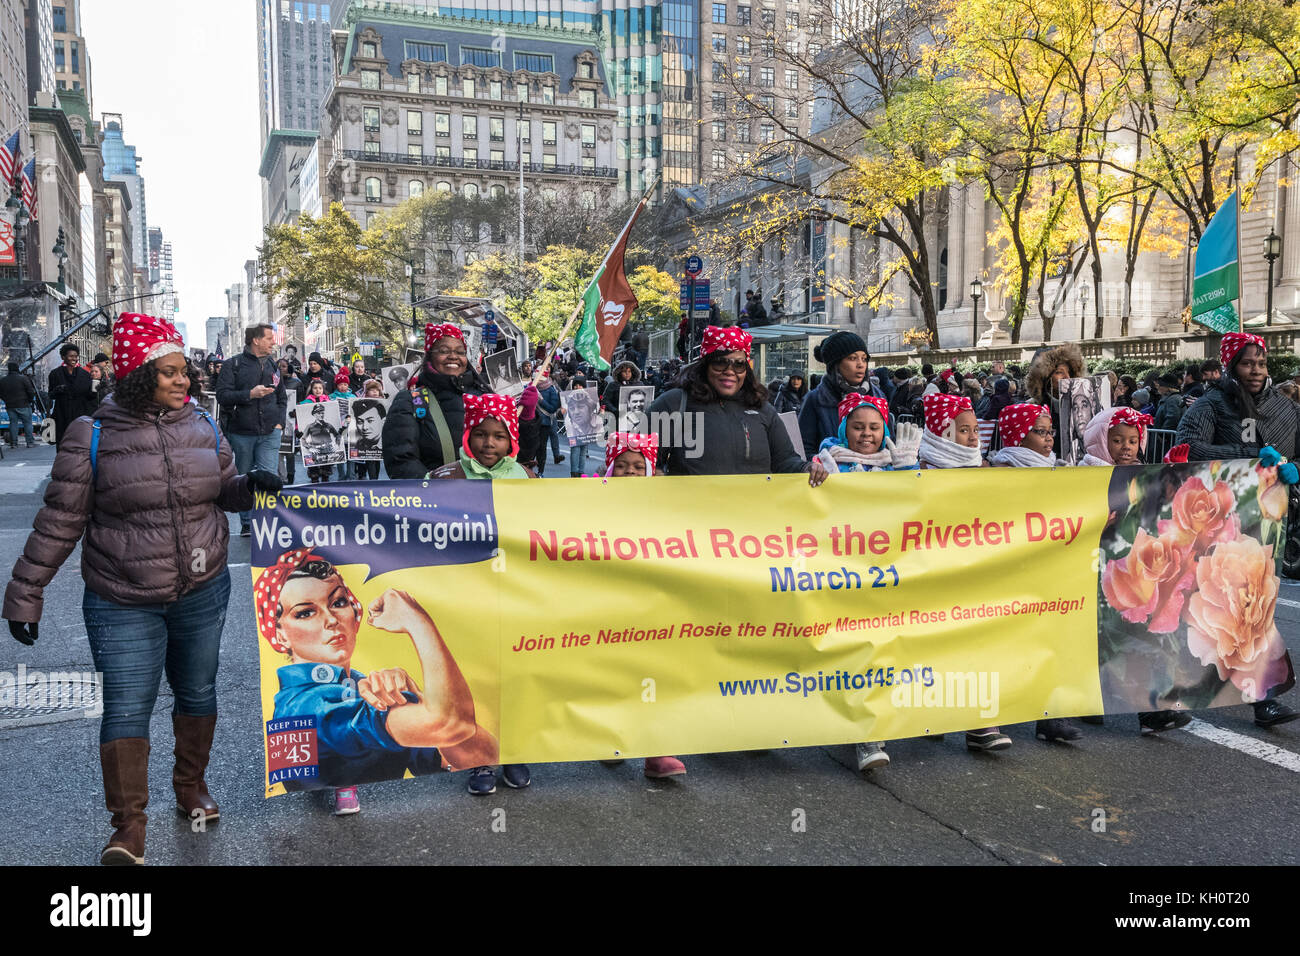 New York, USA, 11 Nov 2017.  Members of the 'Spirit of 45' organization wear headscarf honoring Rosie the Riveter as they march through New York's Fifth Avenue during the 2017 Veterans Day parade . Photo by Enrique Shore/Alamy Live News Stock Photo